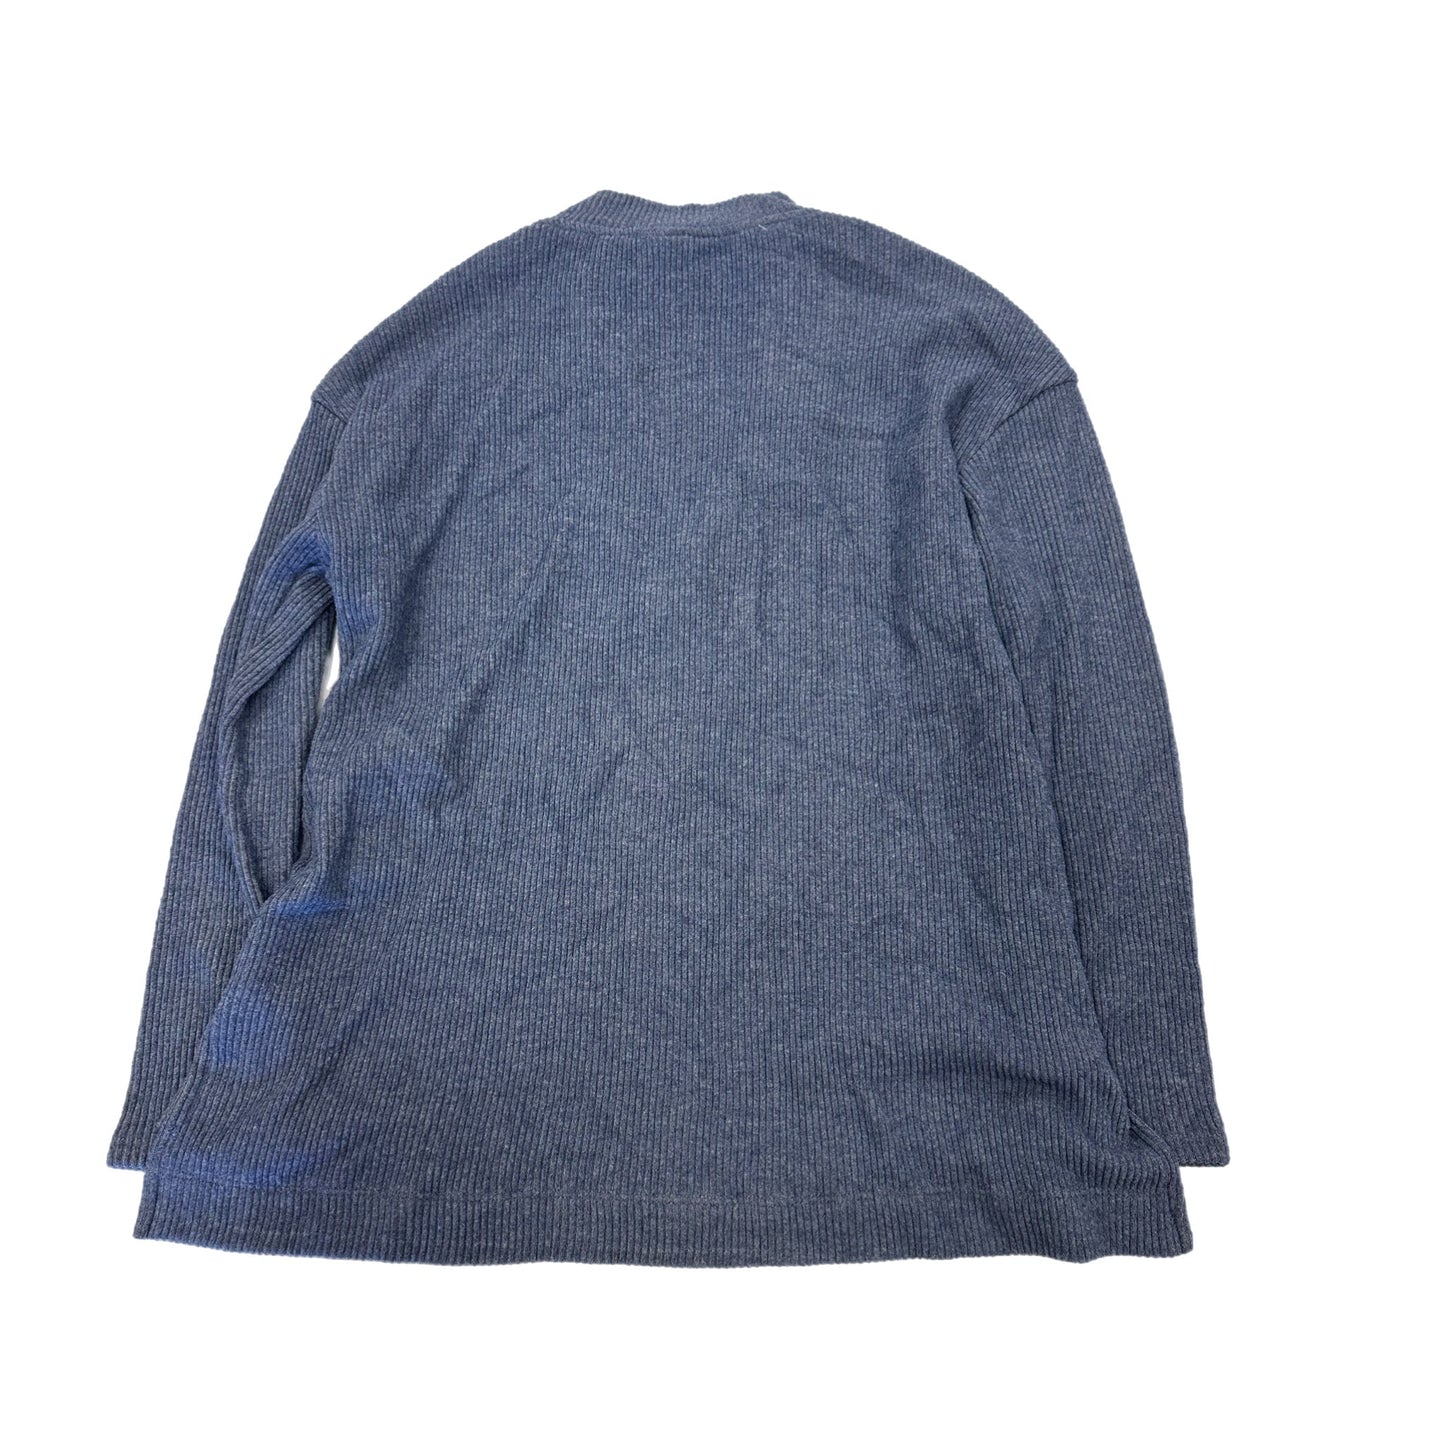 Sweater By Dolan Left Coast  Size: S